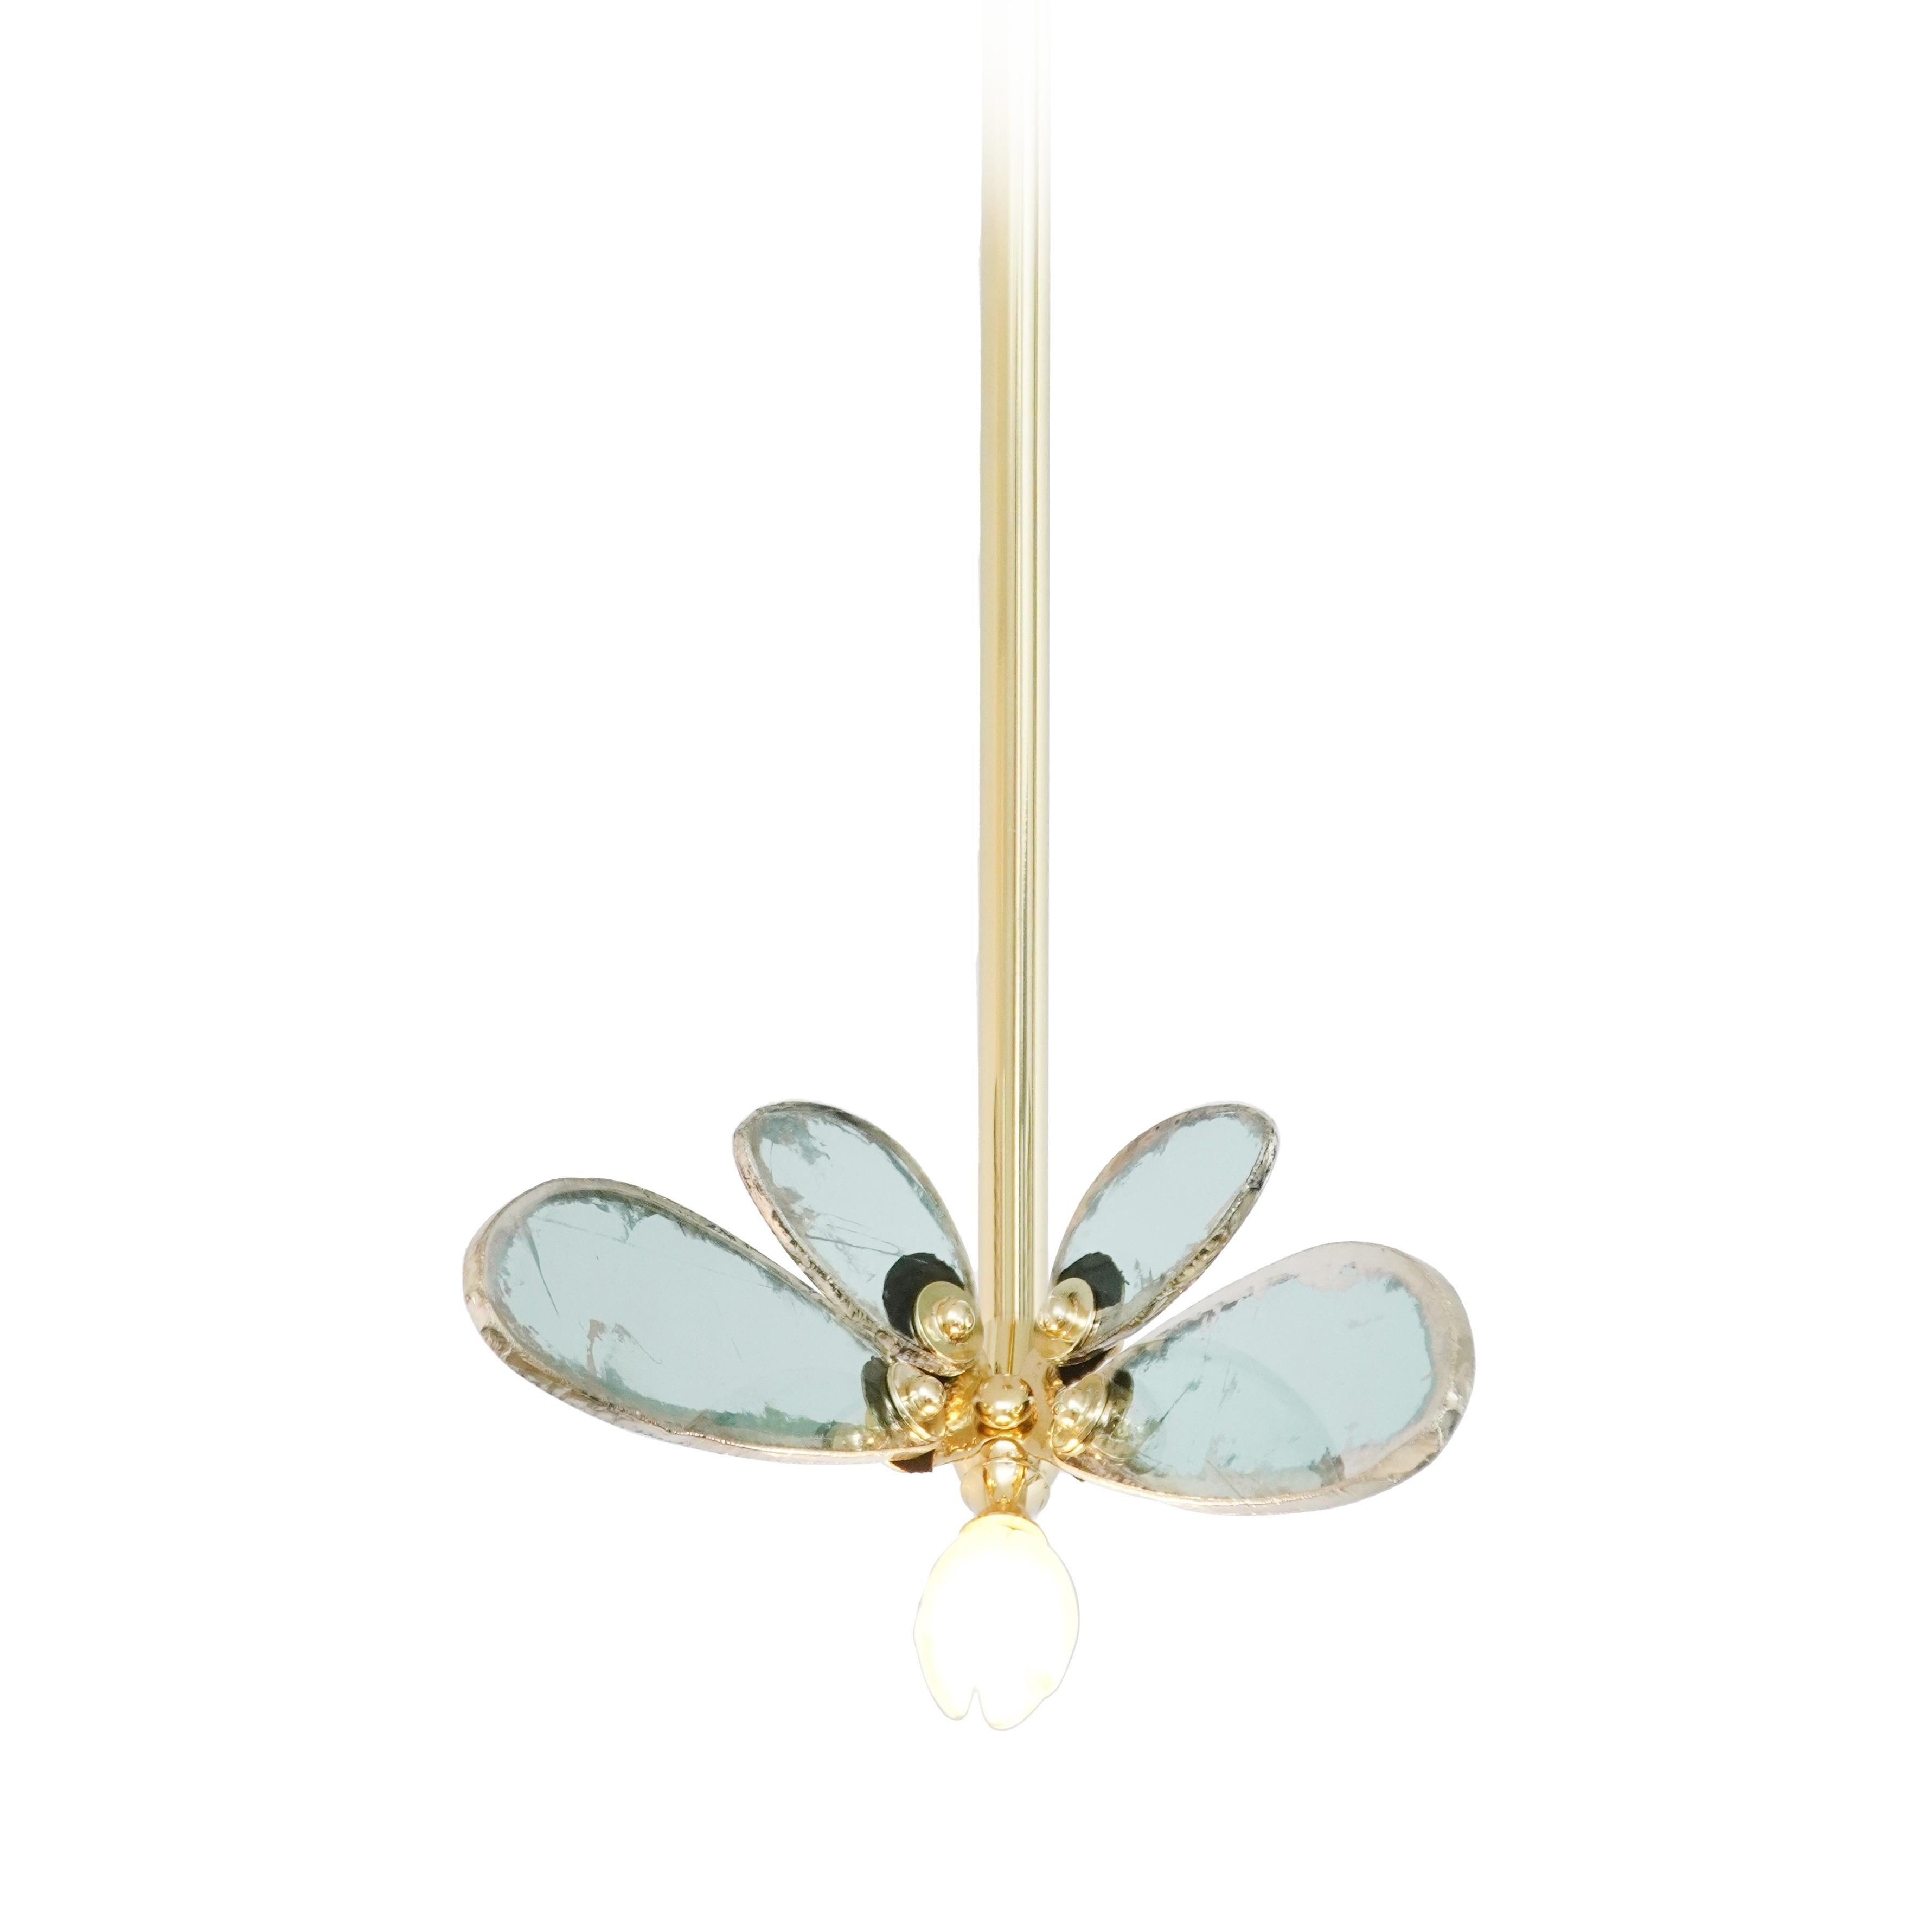 TRILLY The fairy fragrance of freedom

Small and sophisticated, the Trillies, enterely crafted in Italy, are the little sisters of our Butterfly models, they bring an ethereal allure to your home décor, thanks to their colored and silvered glass